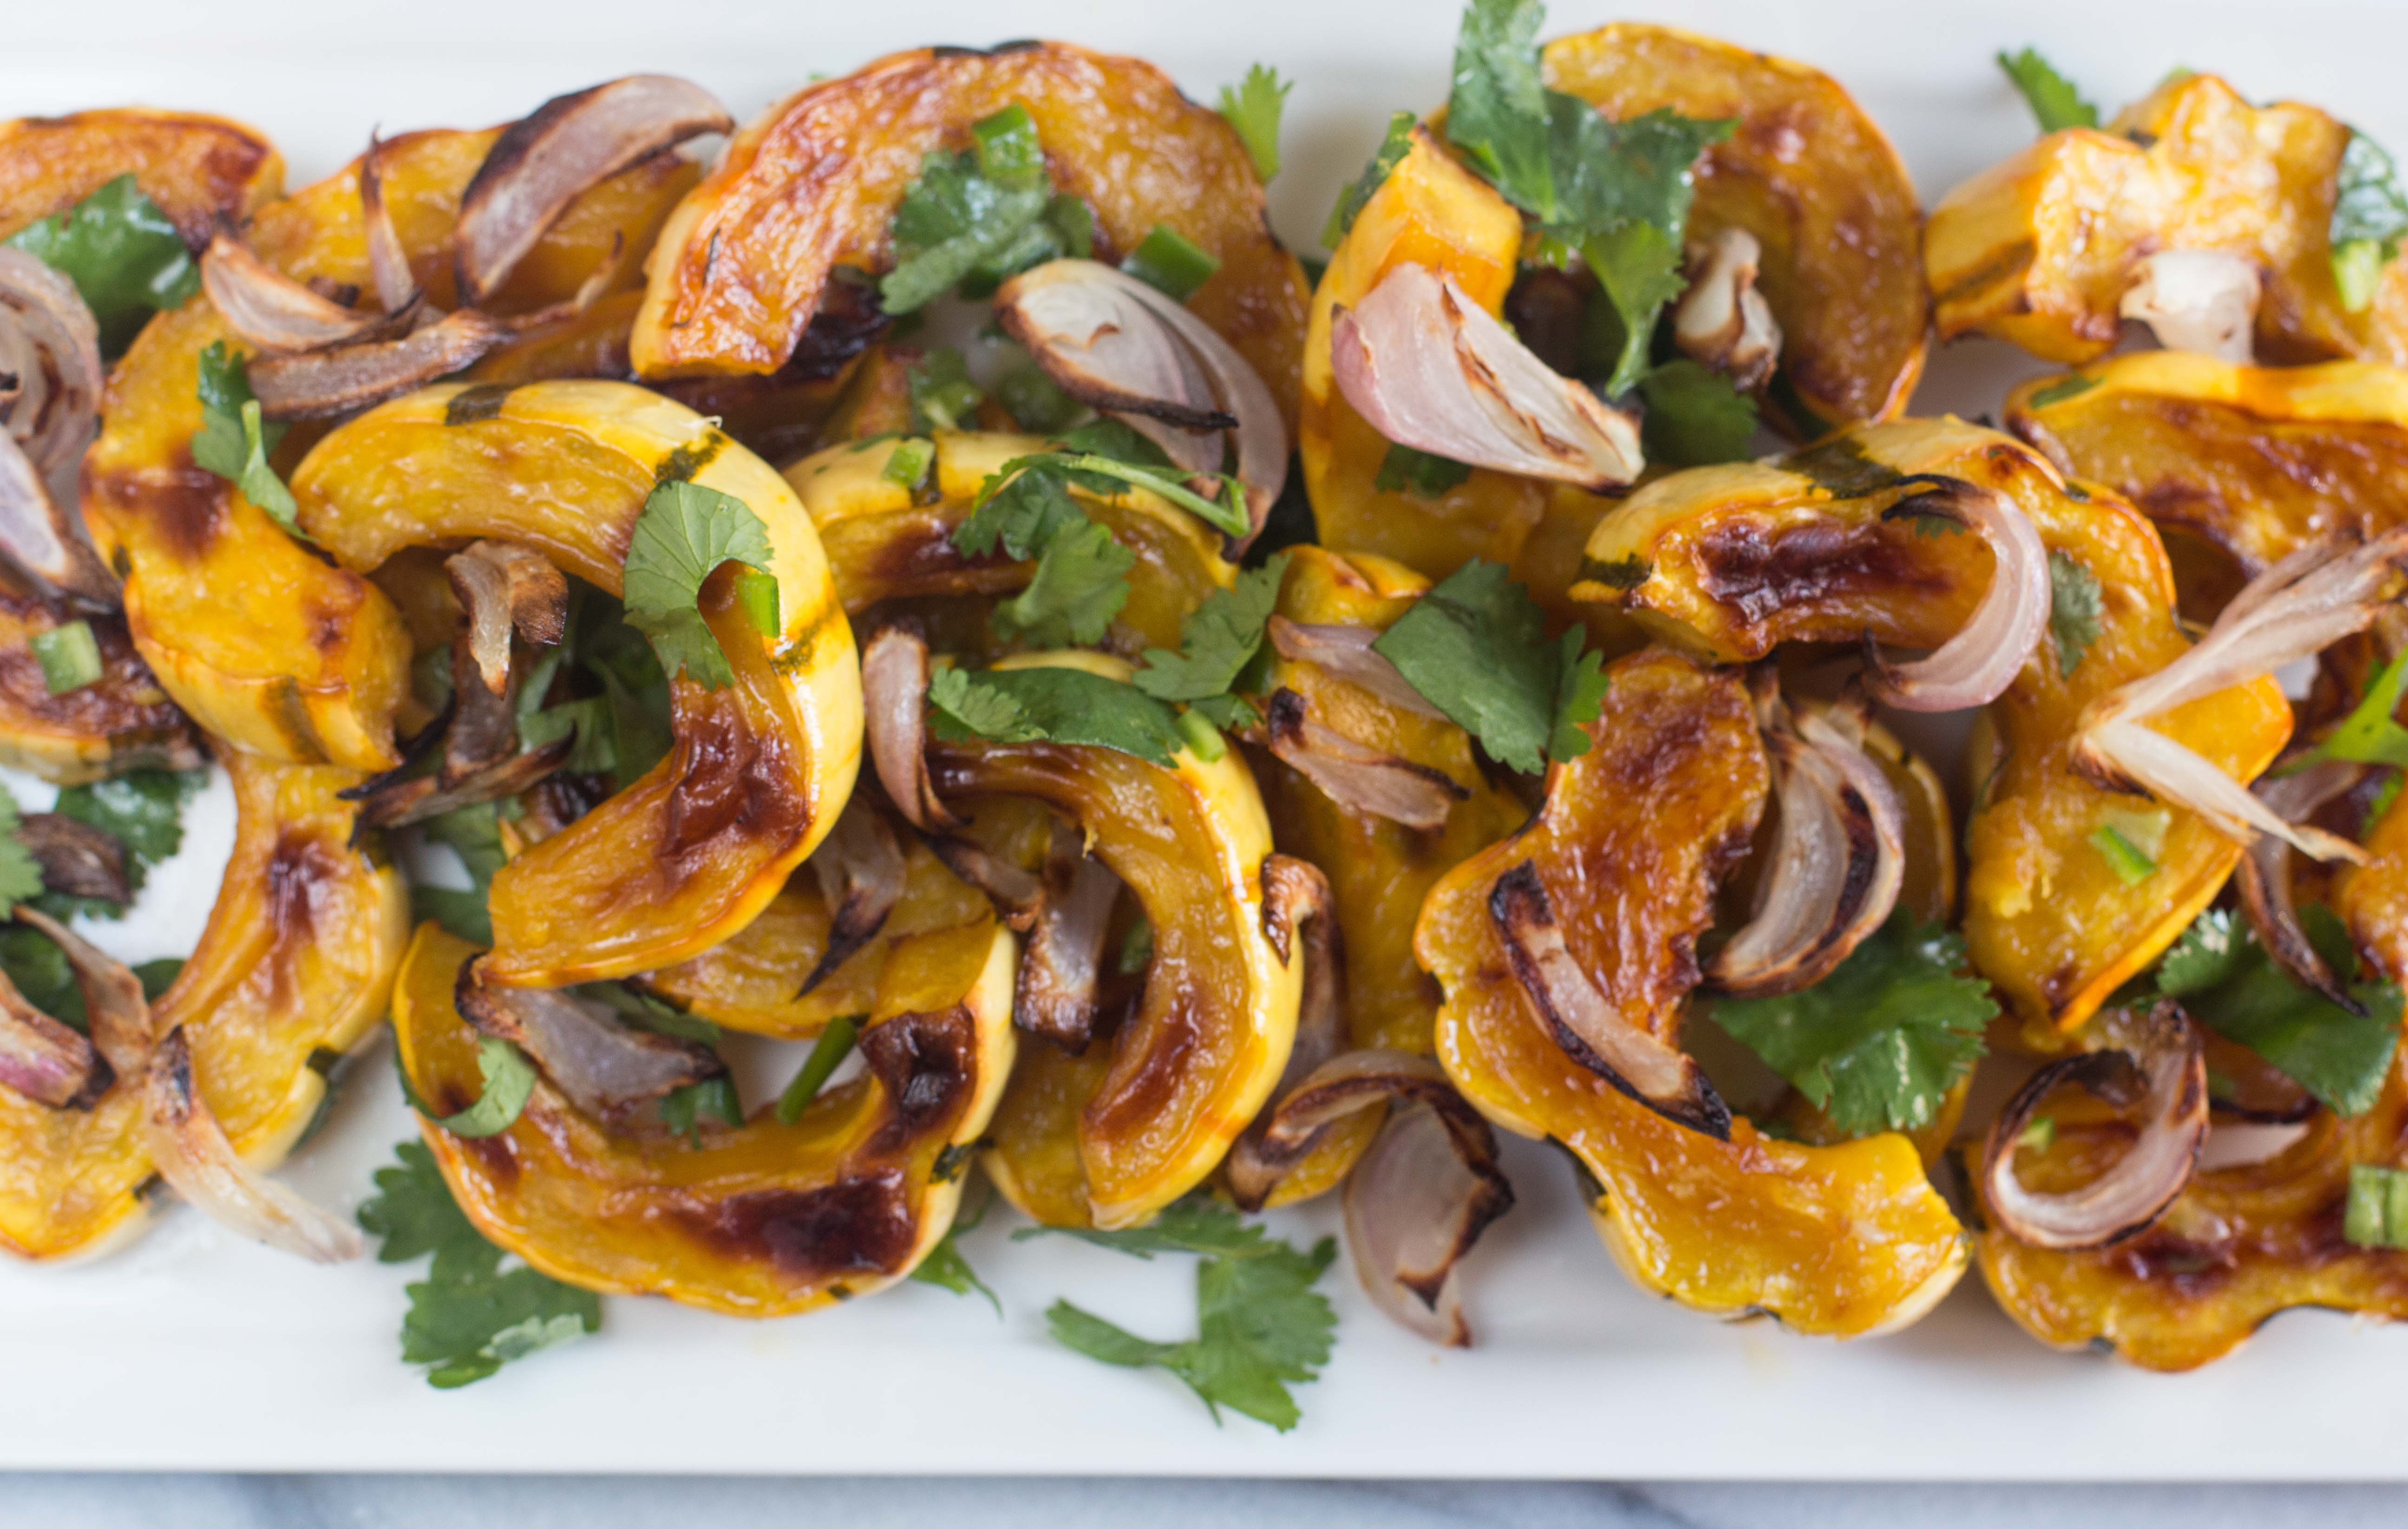 Roasted Delicata Squash with Shallots in Chile-Lime Cilantro Dressing